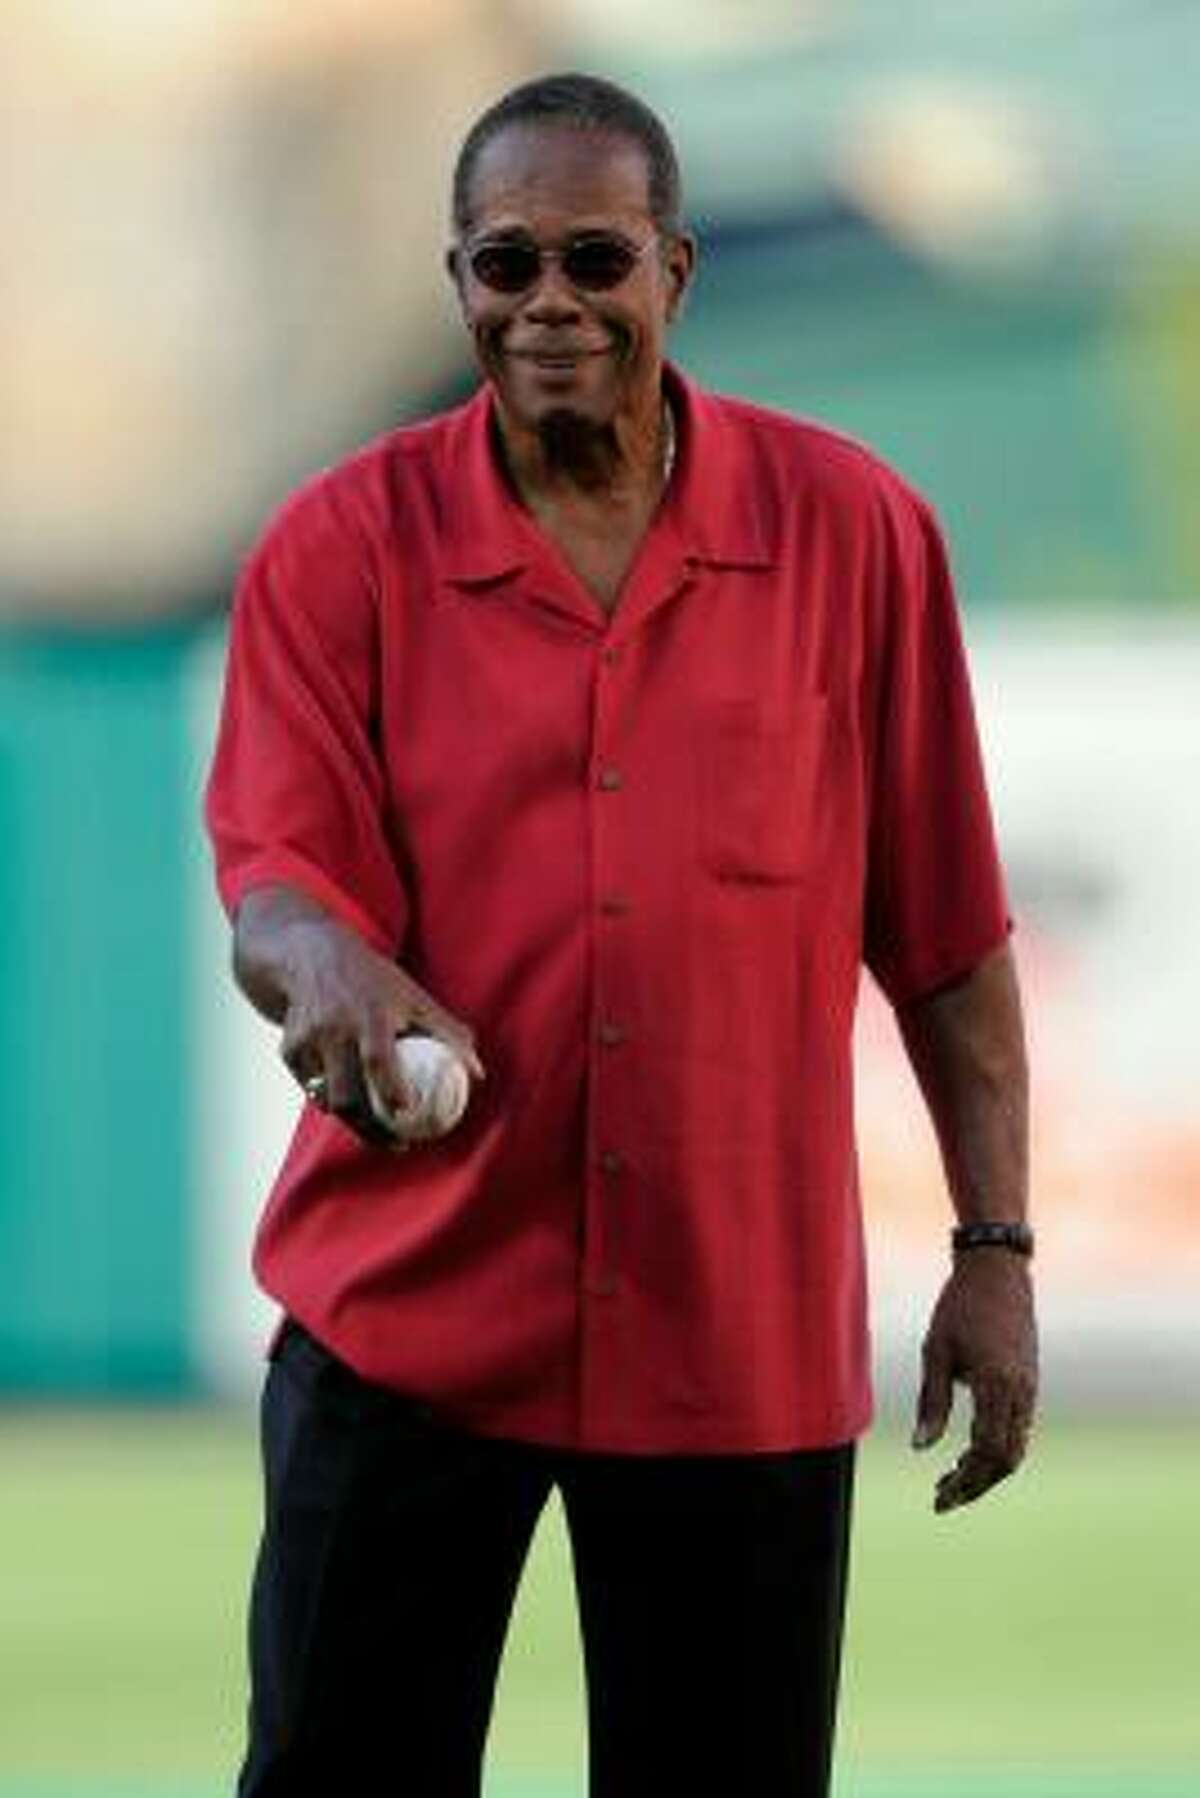 Baseball Hall of Fame member Rod Carew throws out the first pitch.